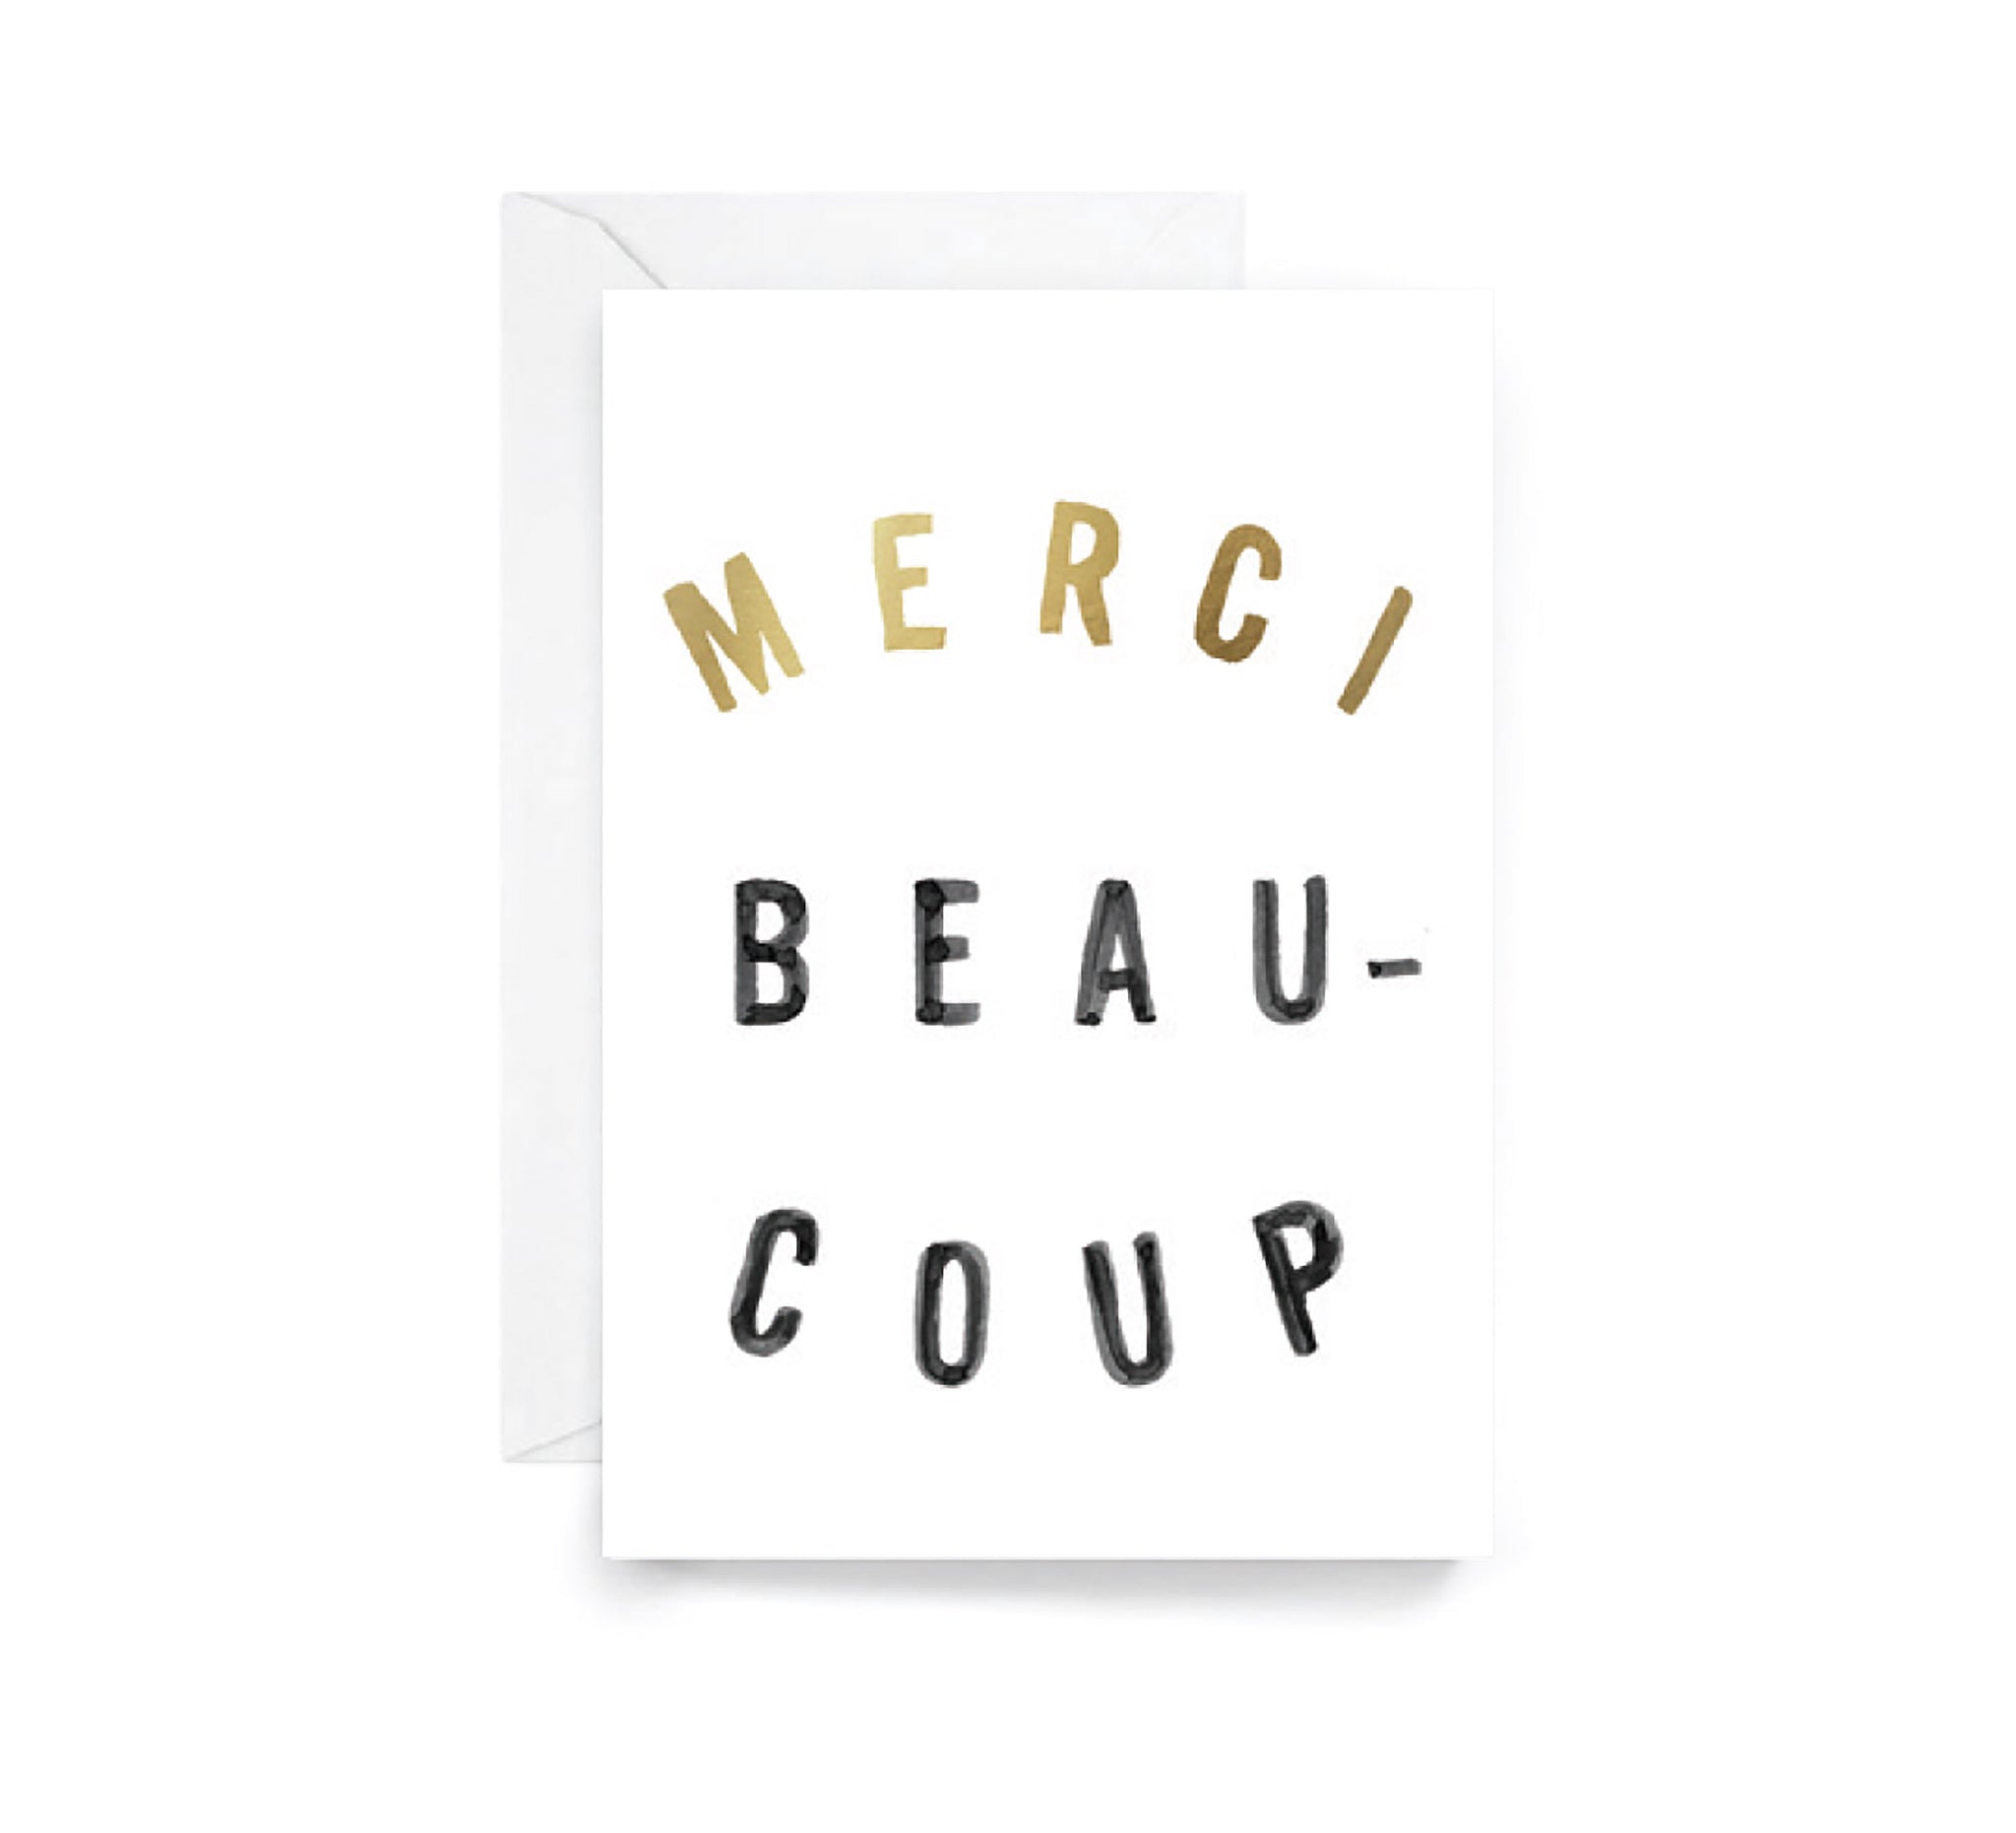 12. MERCI BEAUCOUP CARDS - (PACK OF 6)